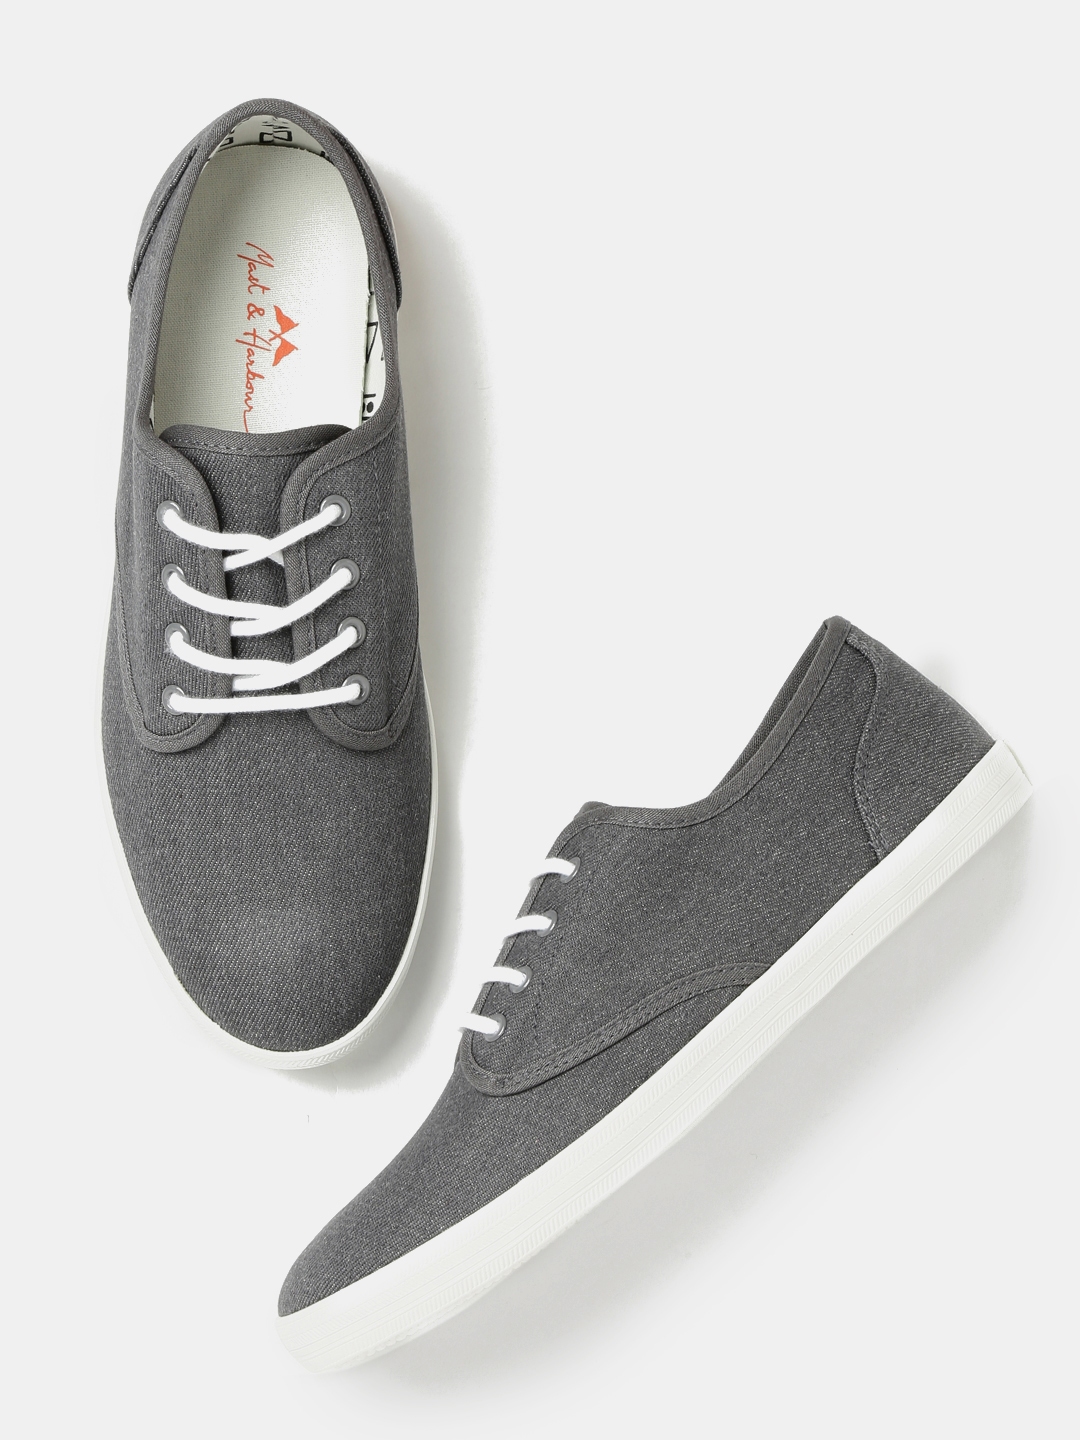 charcoal grey tennis shoes